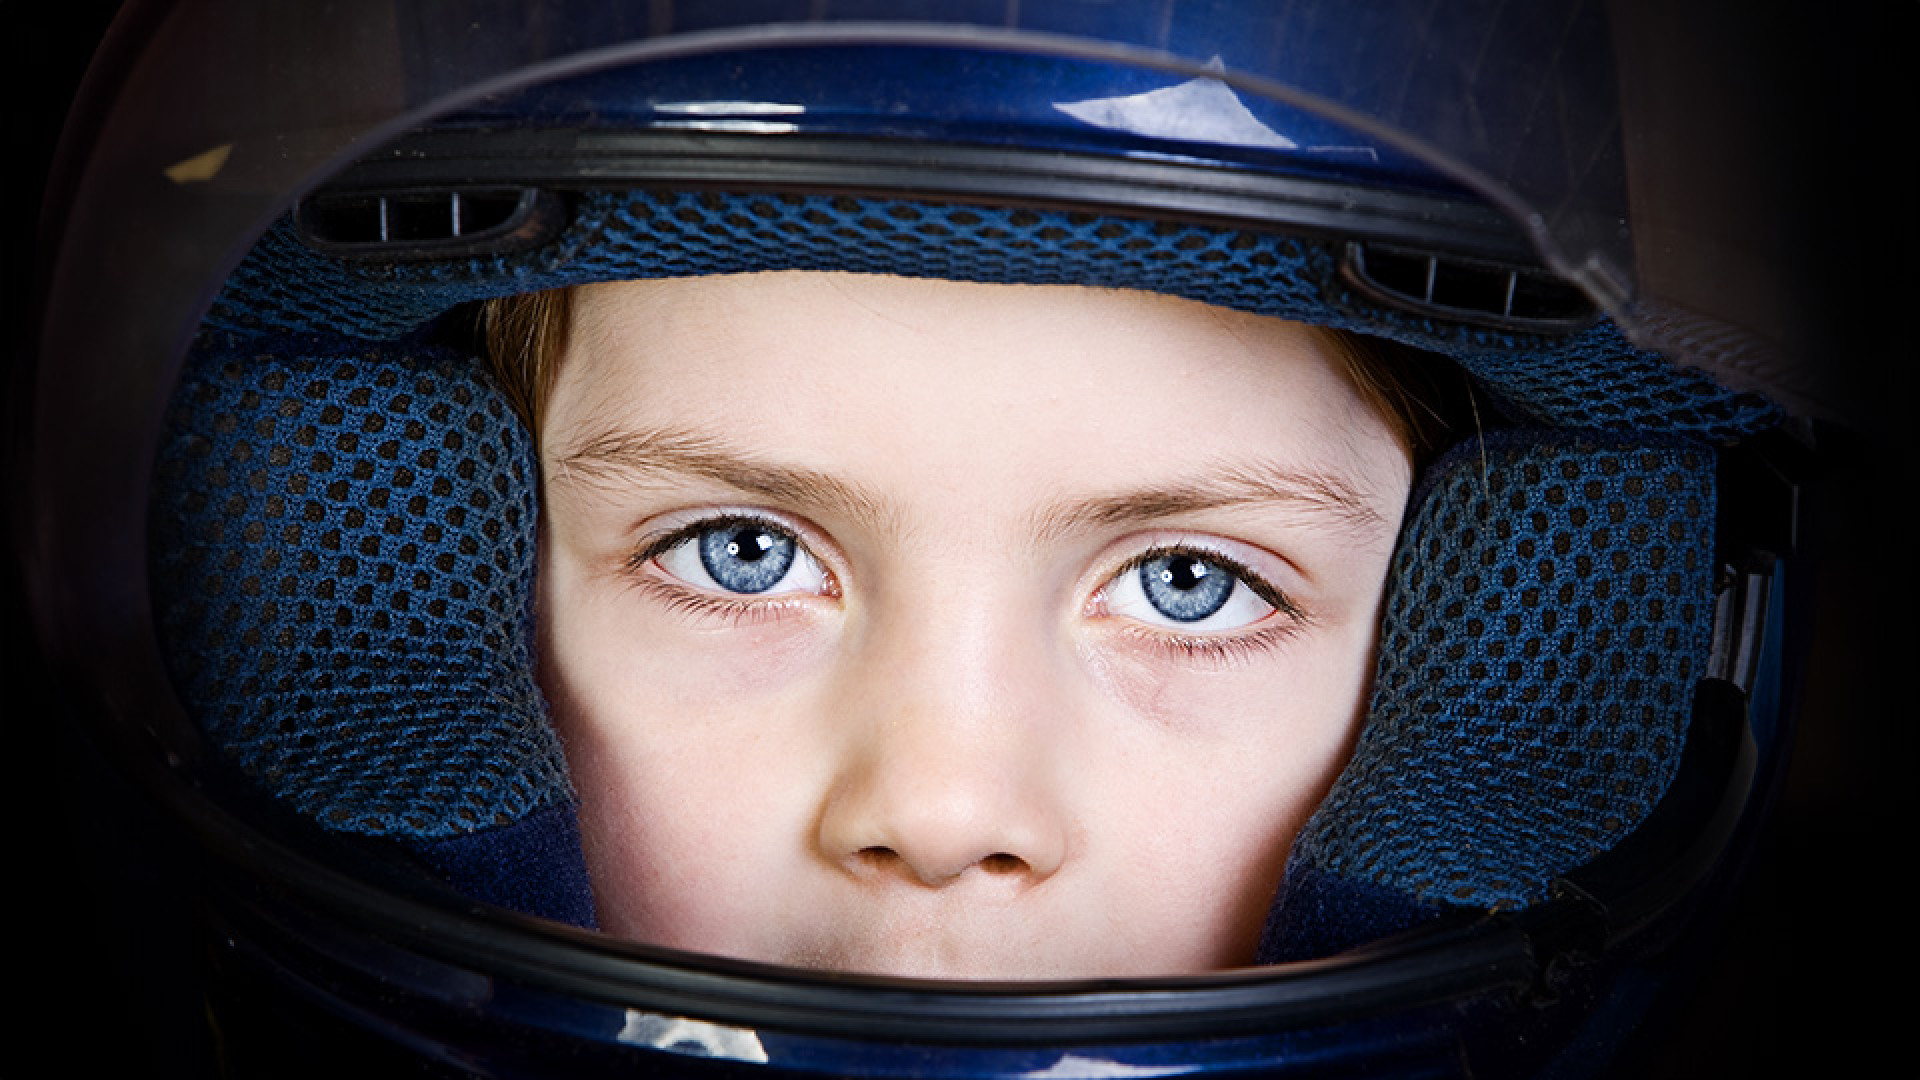 https://www.raceleathers.co.uk/image/cache/catalog/Blog%20Images/How%20Do%20I%20Know%20What%20Size%20Helmet%20to%20Buy%20My%20Child-1920x1080.jpg